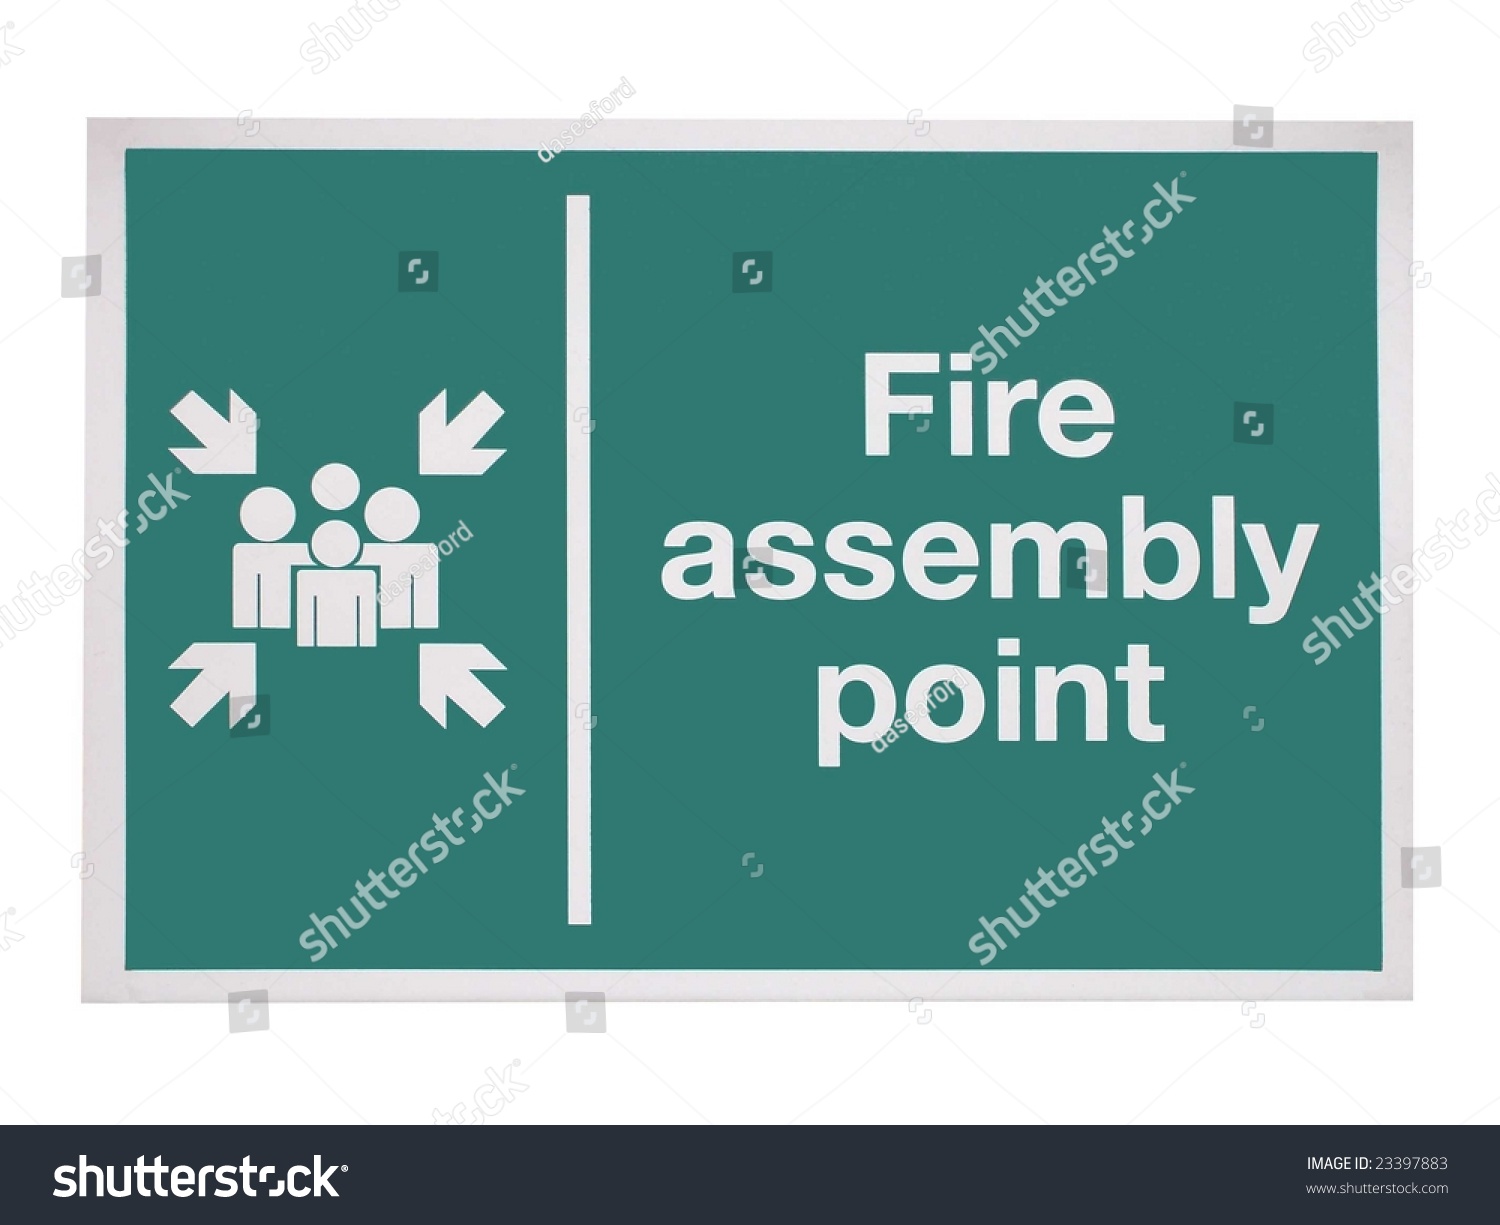 fire-assembly-point-sign-stock-photo-23397883-shutterstock